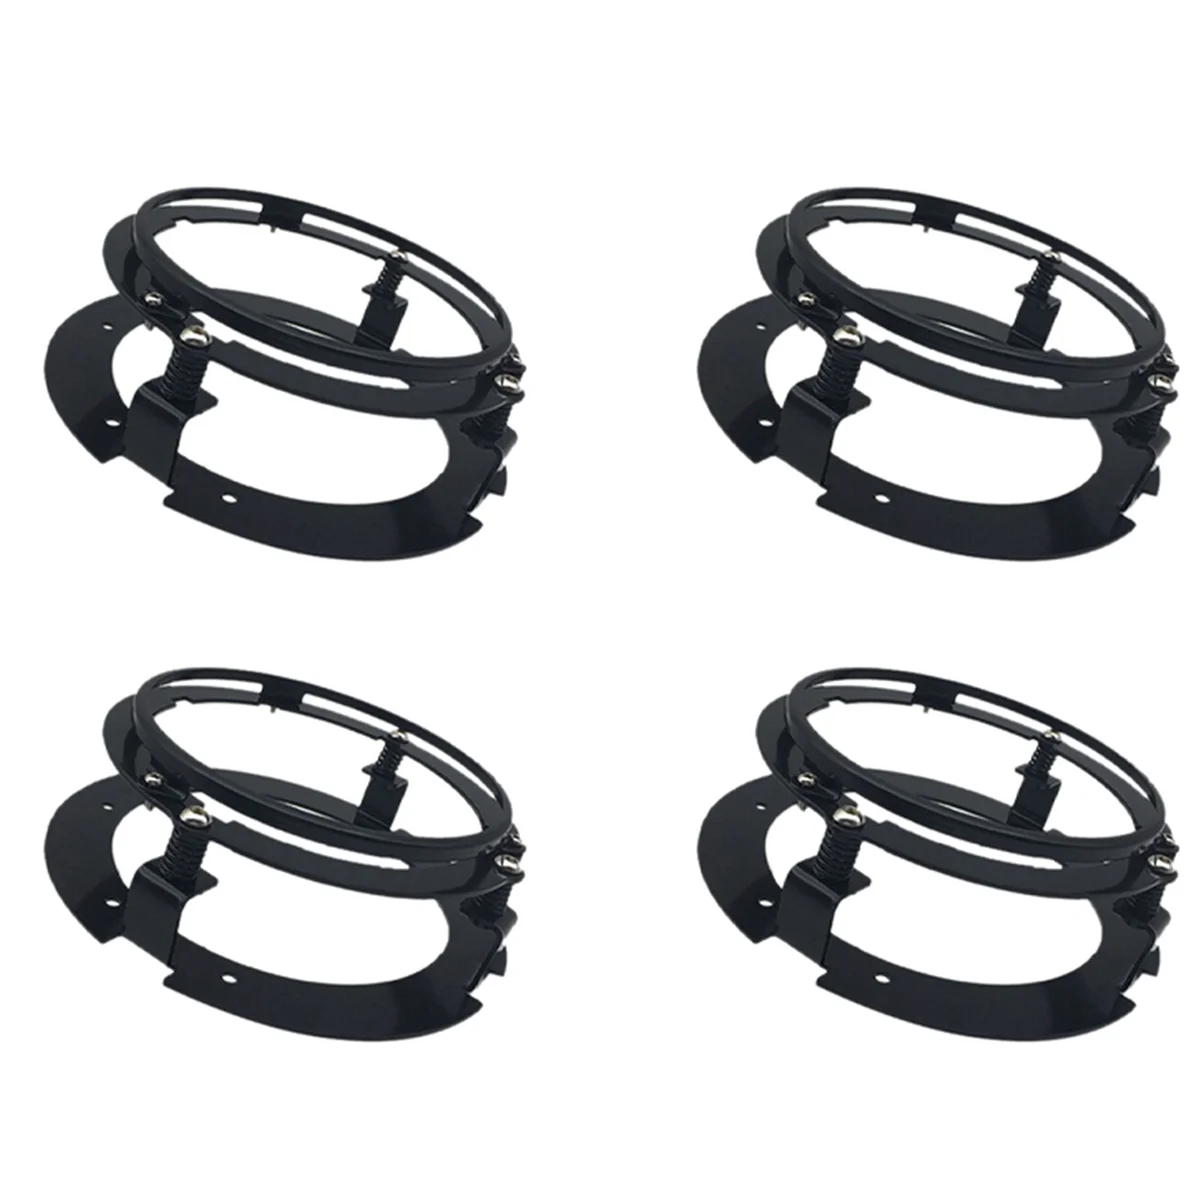 

4pcs 5.75 Inch Black Car Motorcycles Headlight Round Mounting Bracket Suitable for Harley Touring Softail Jeep